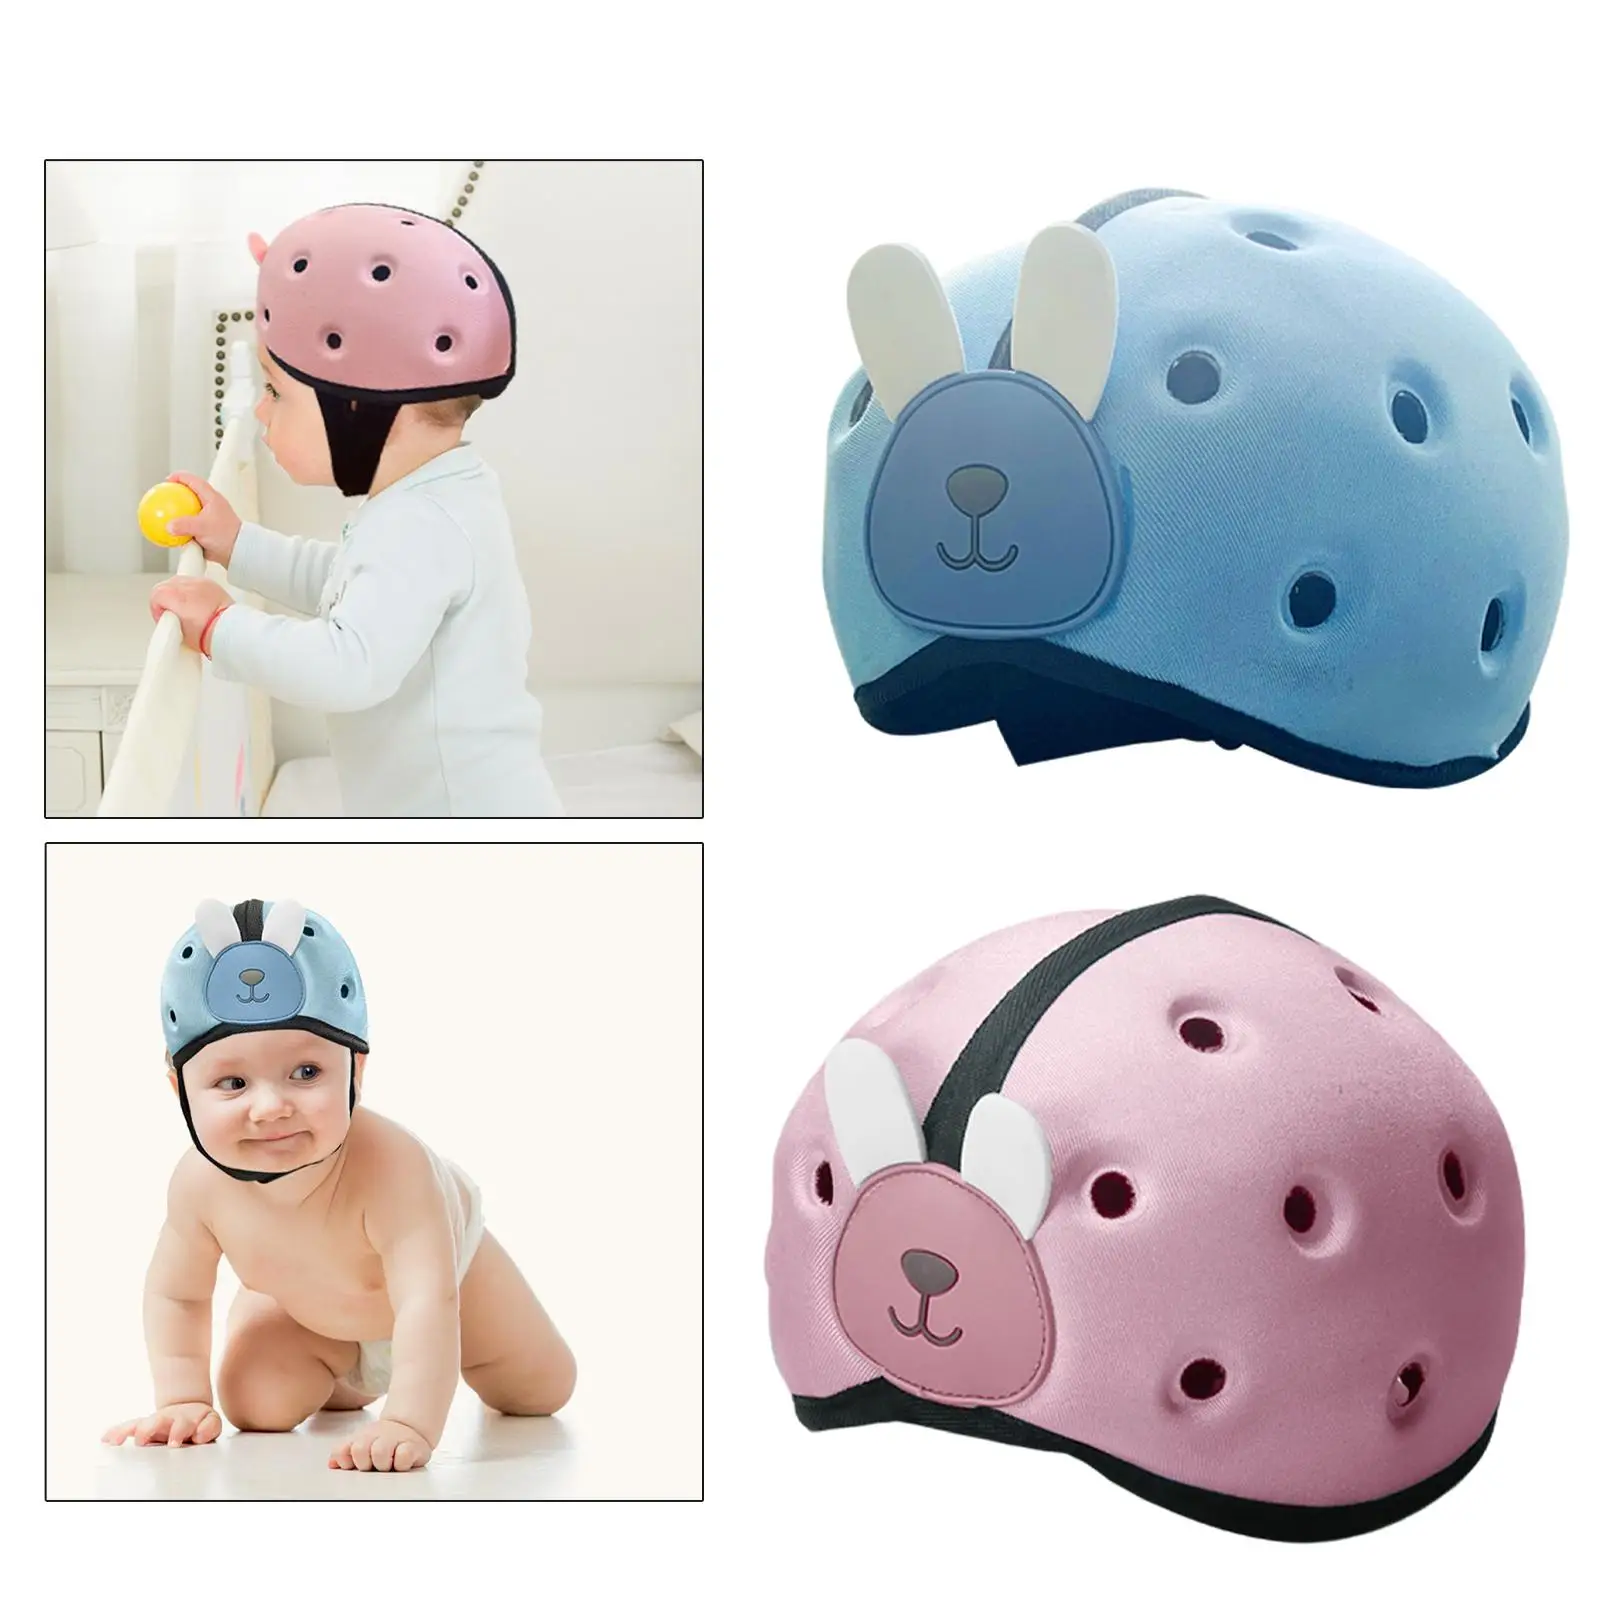 Soft Baby Helmet Protective Adjustable Breathable, Anti-Fall, Harnesses Hat,